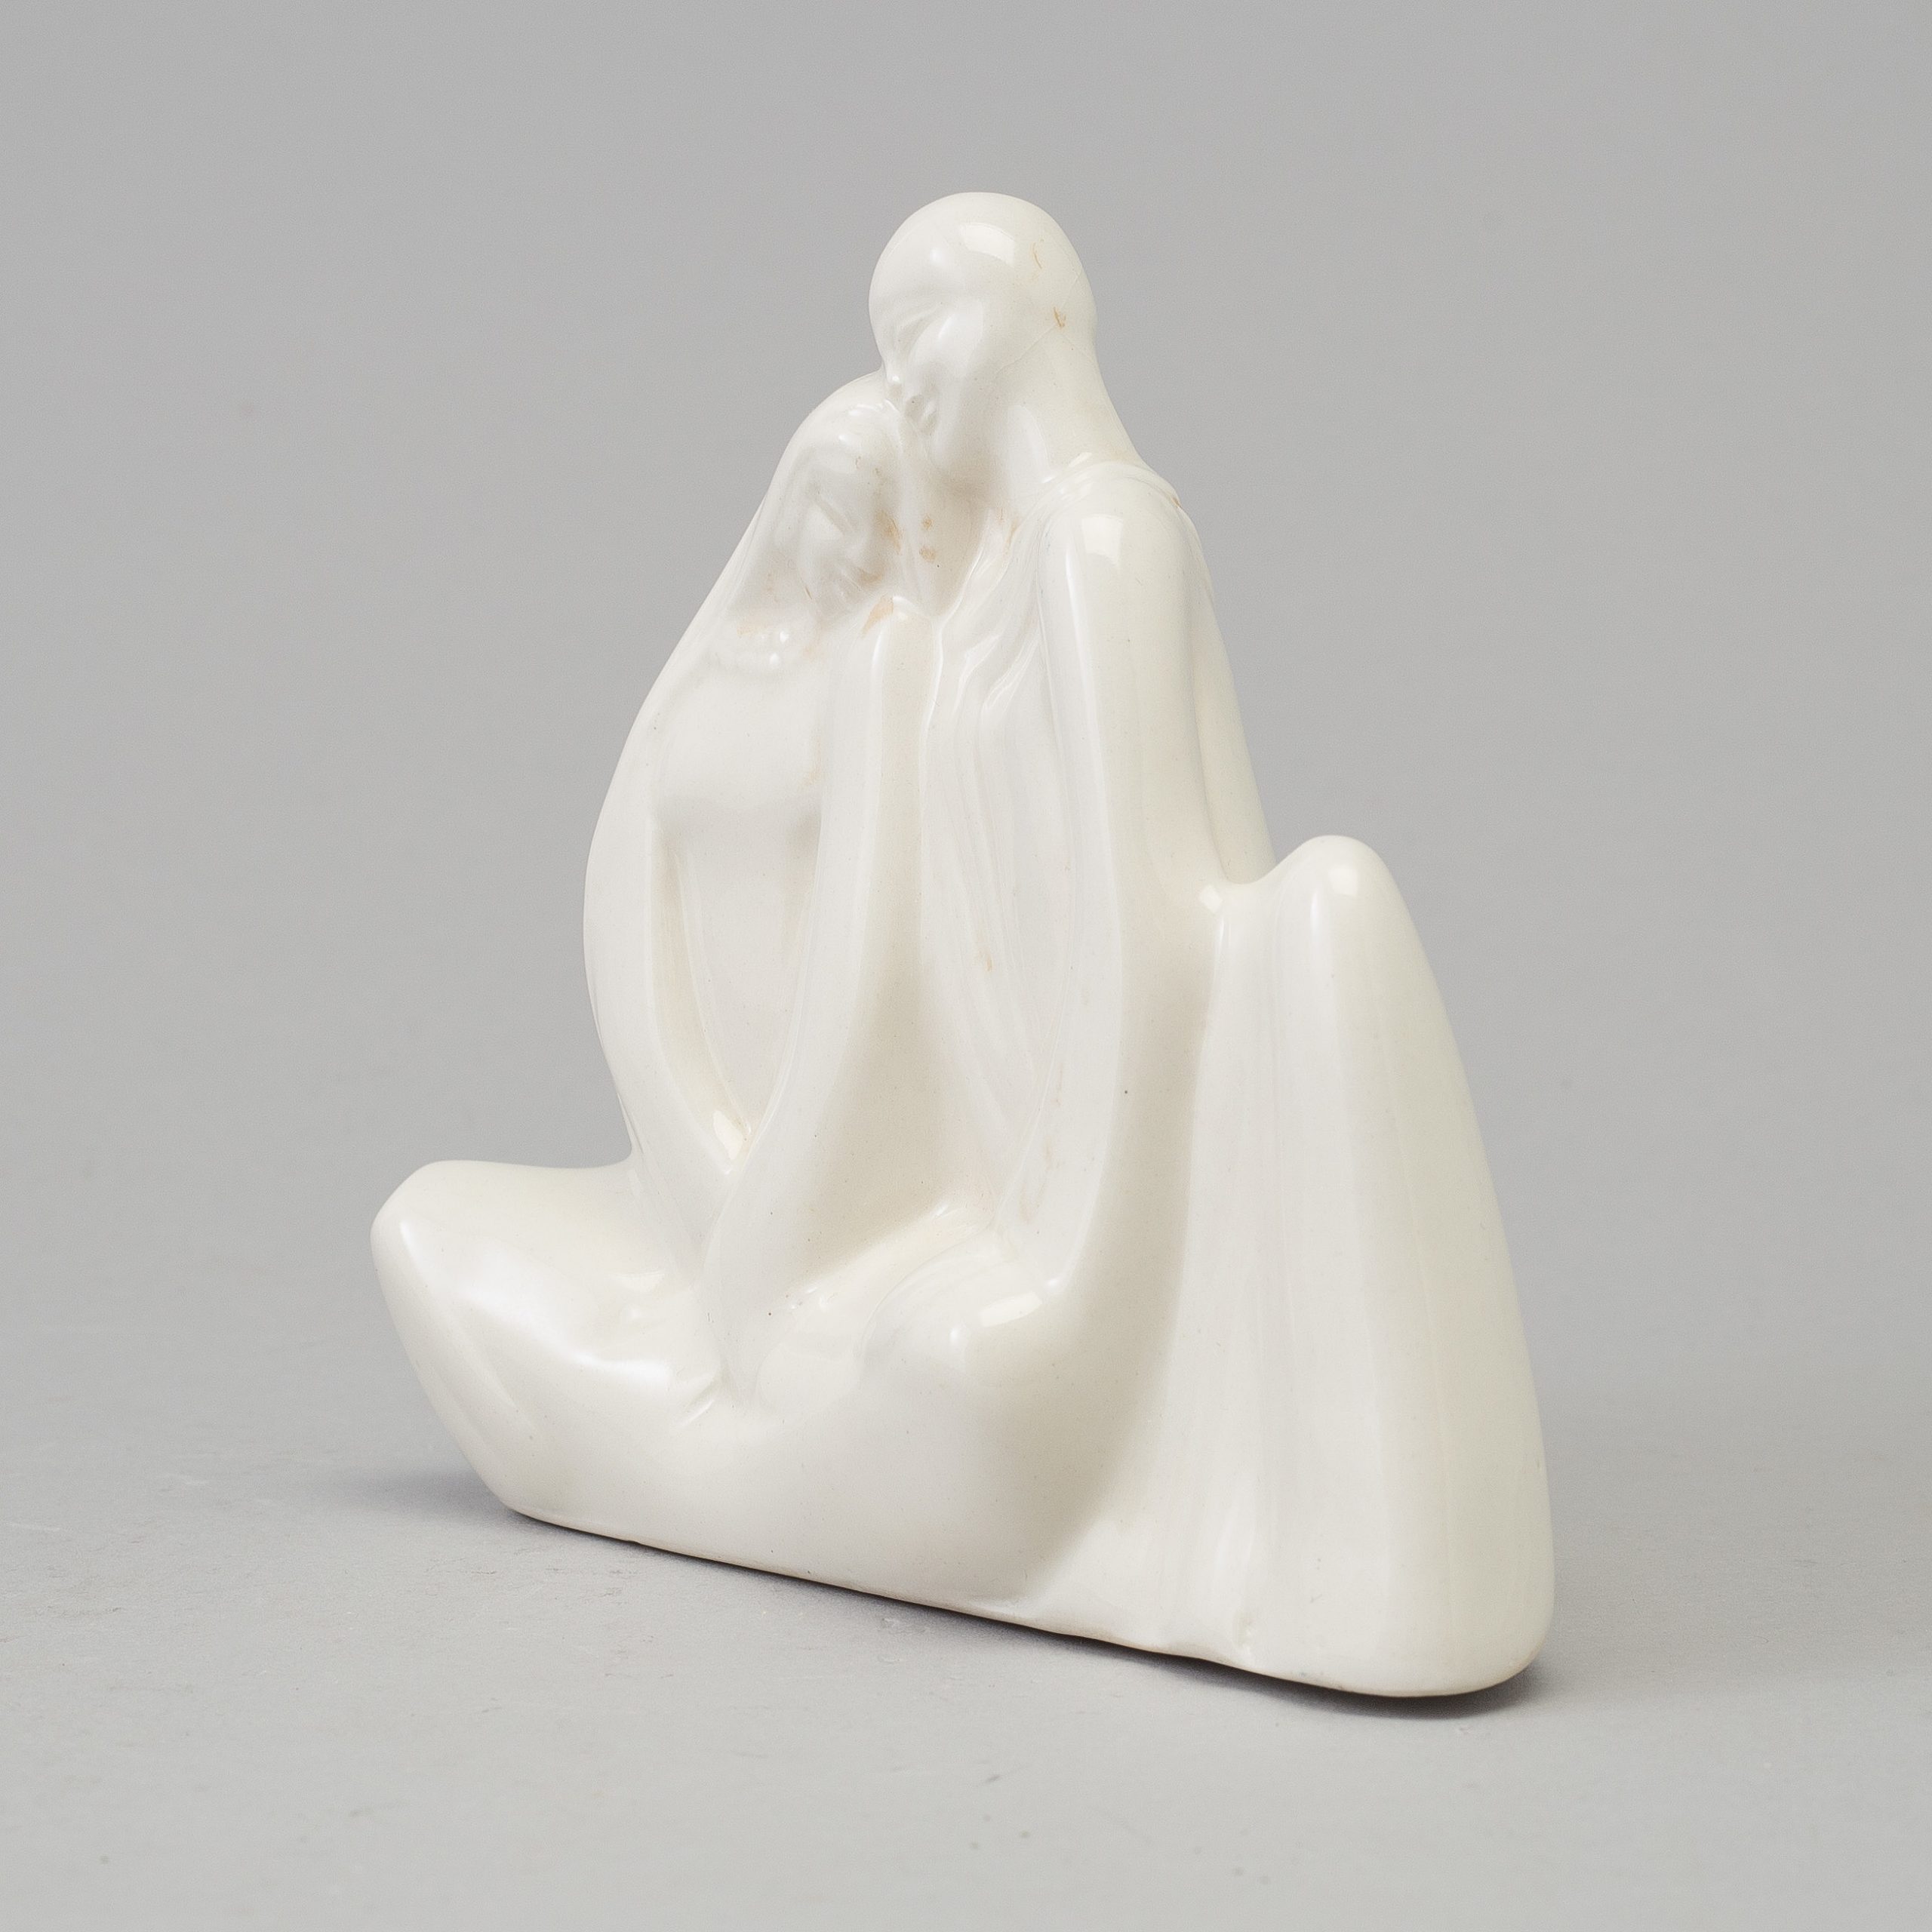 Hassan Heshmat (1920-2006) Femme accroupie I, 1977 Signed & dated Offwhite porcelain 26.5 x 21.5 x 14.5 cm (HH-116)